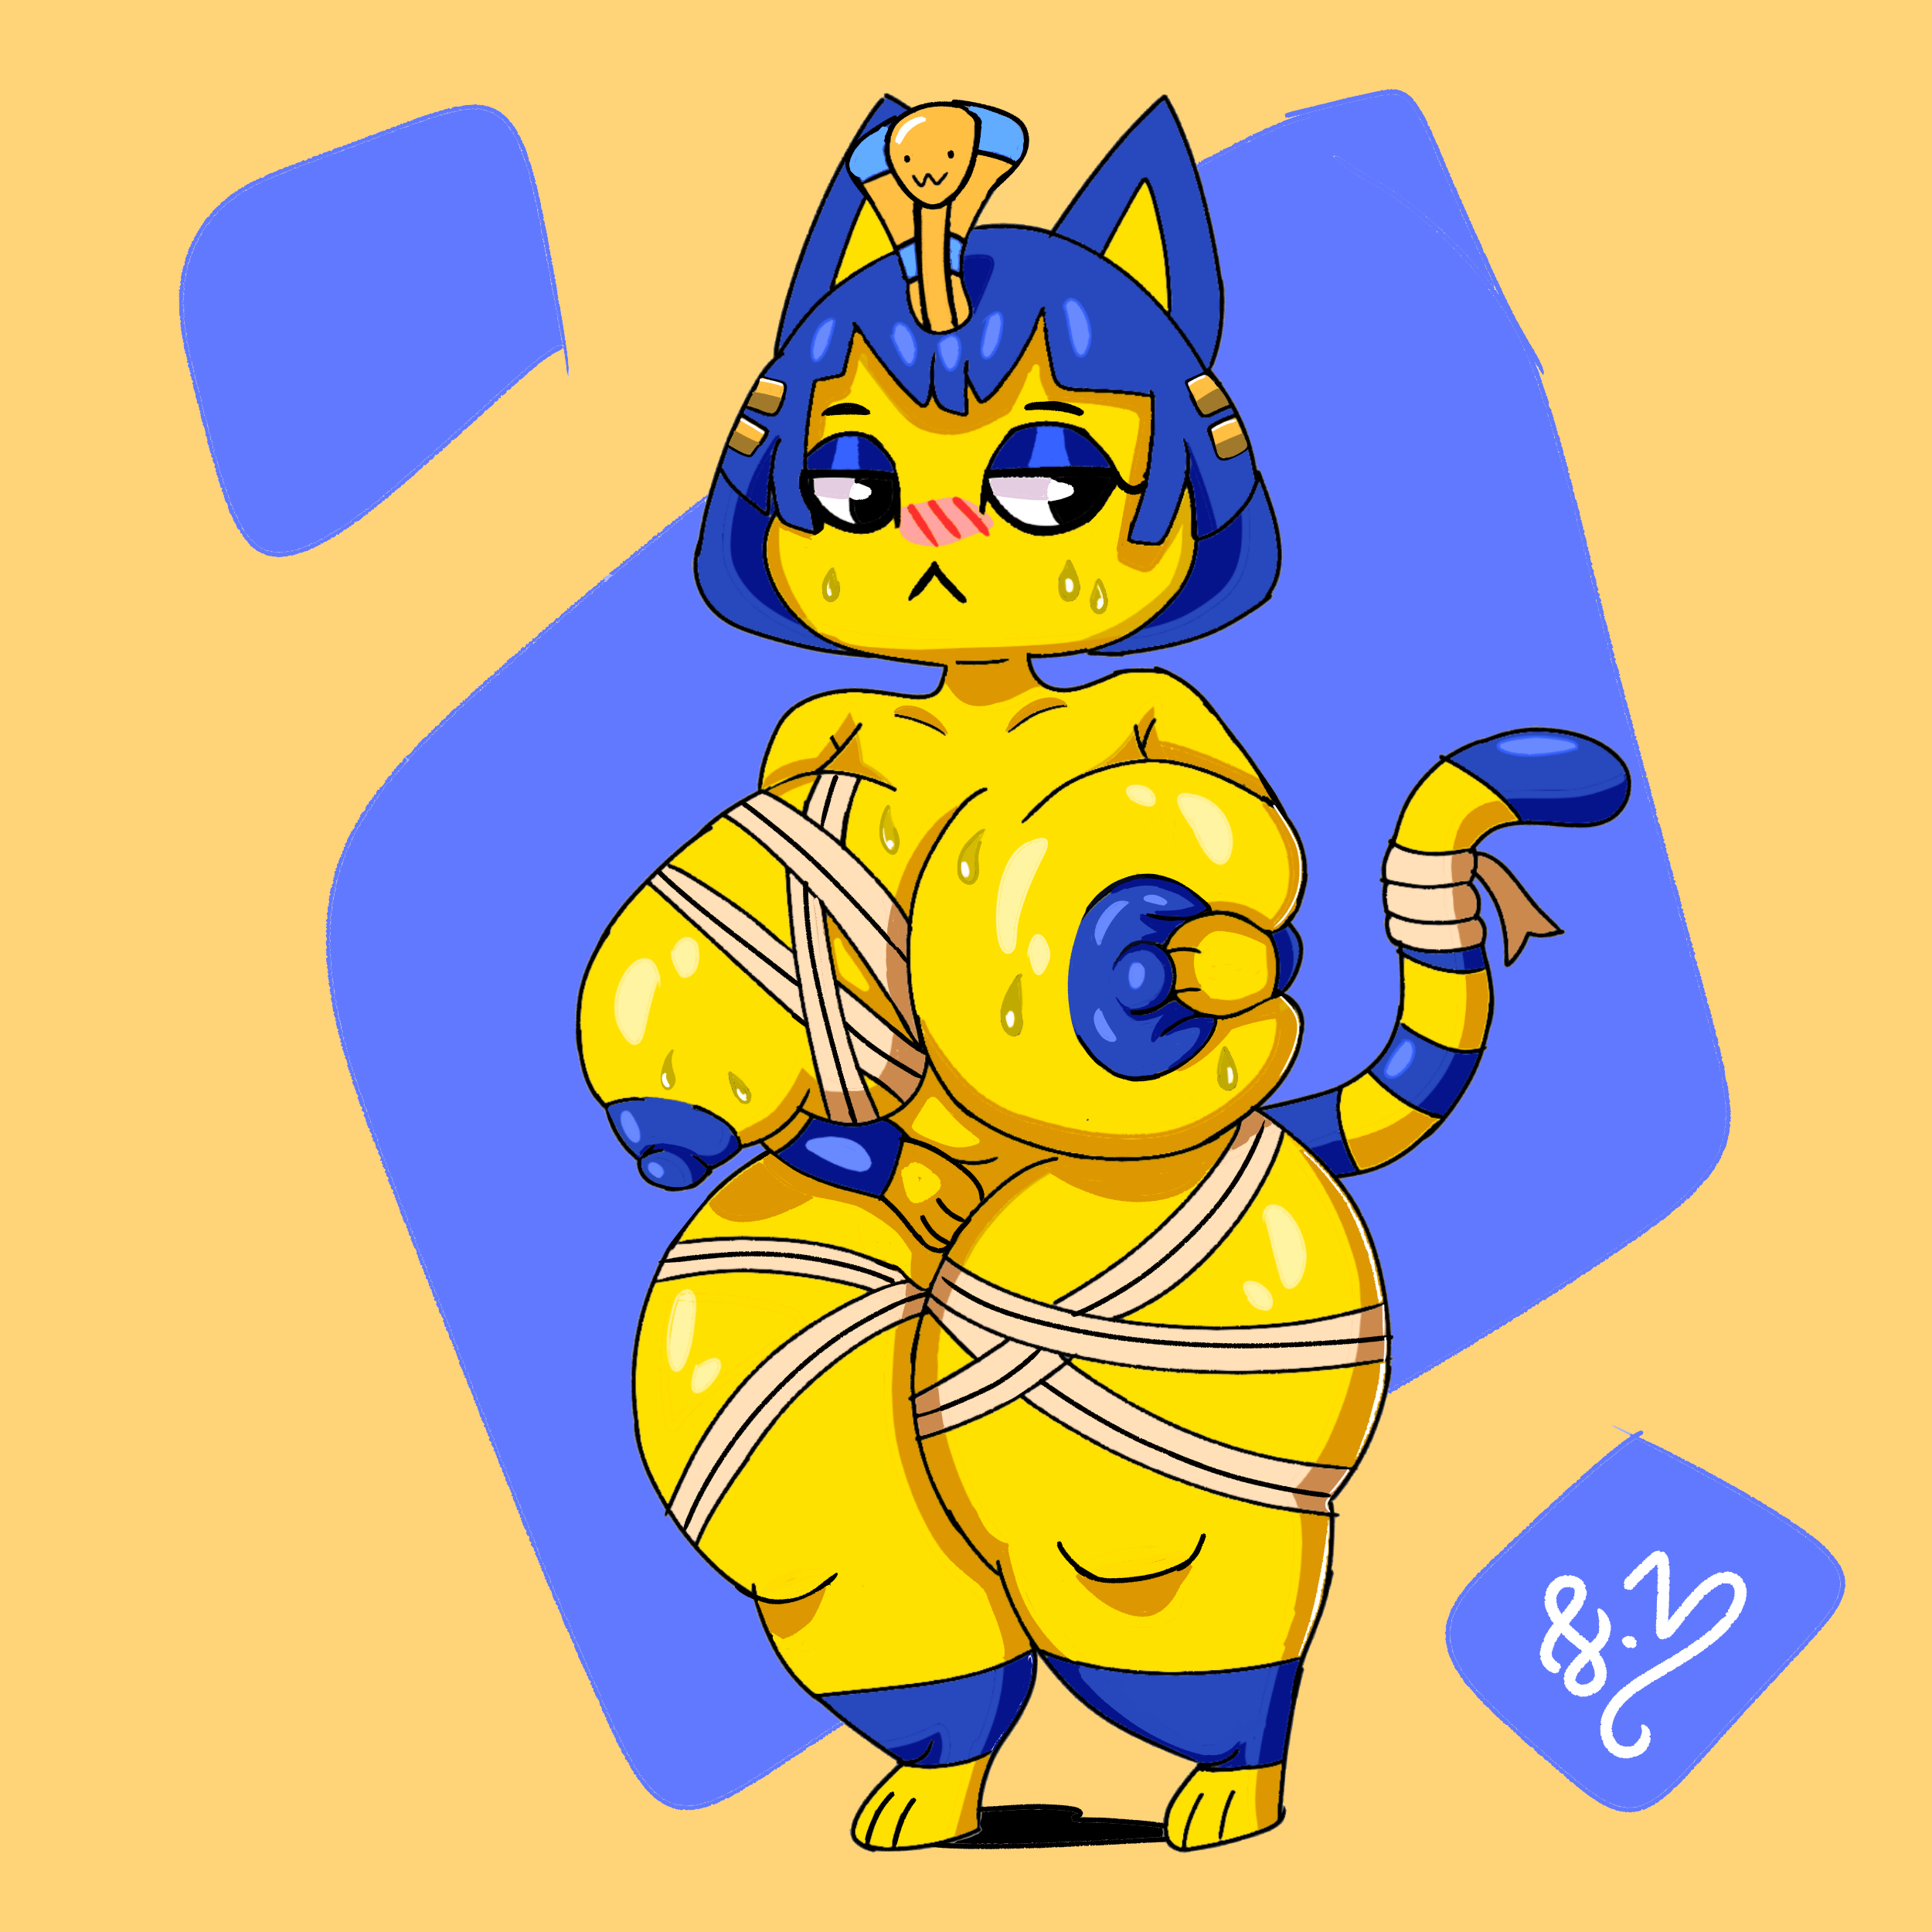 Ankha's Pregnant and Proud: A Hot Galery Collection